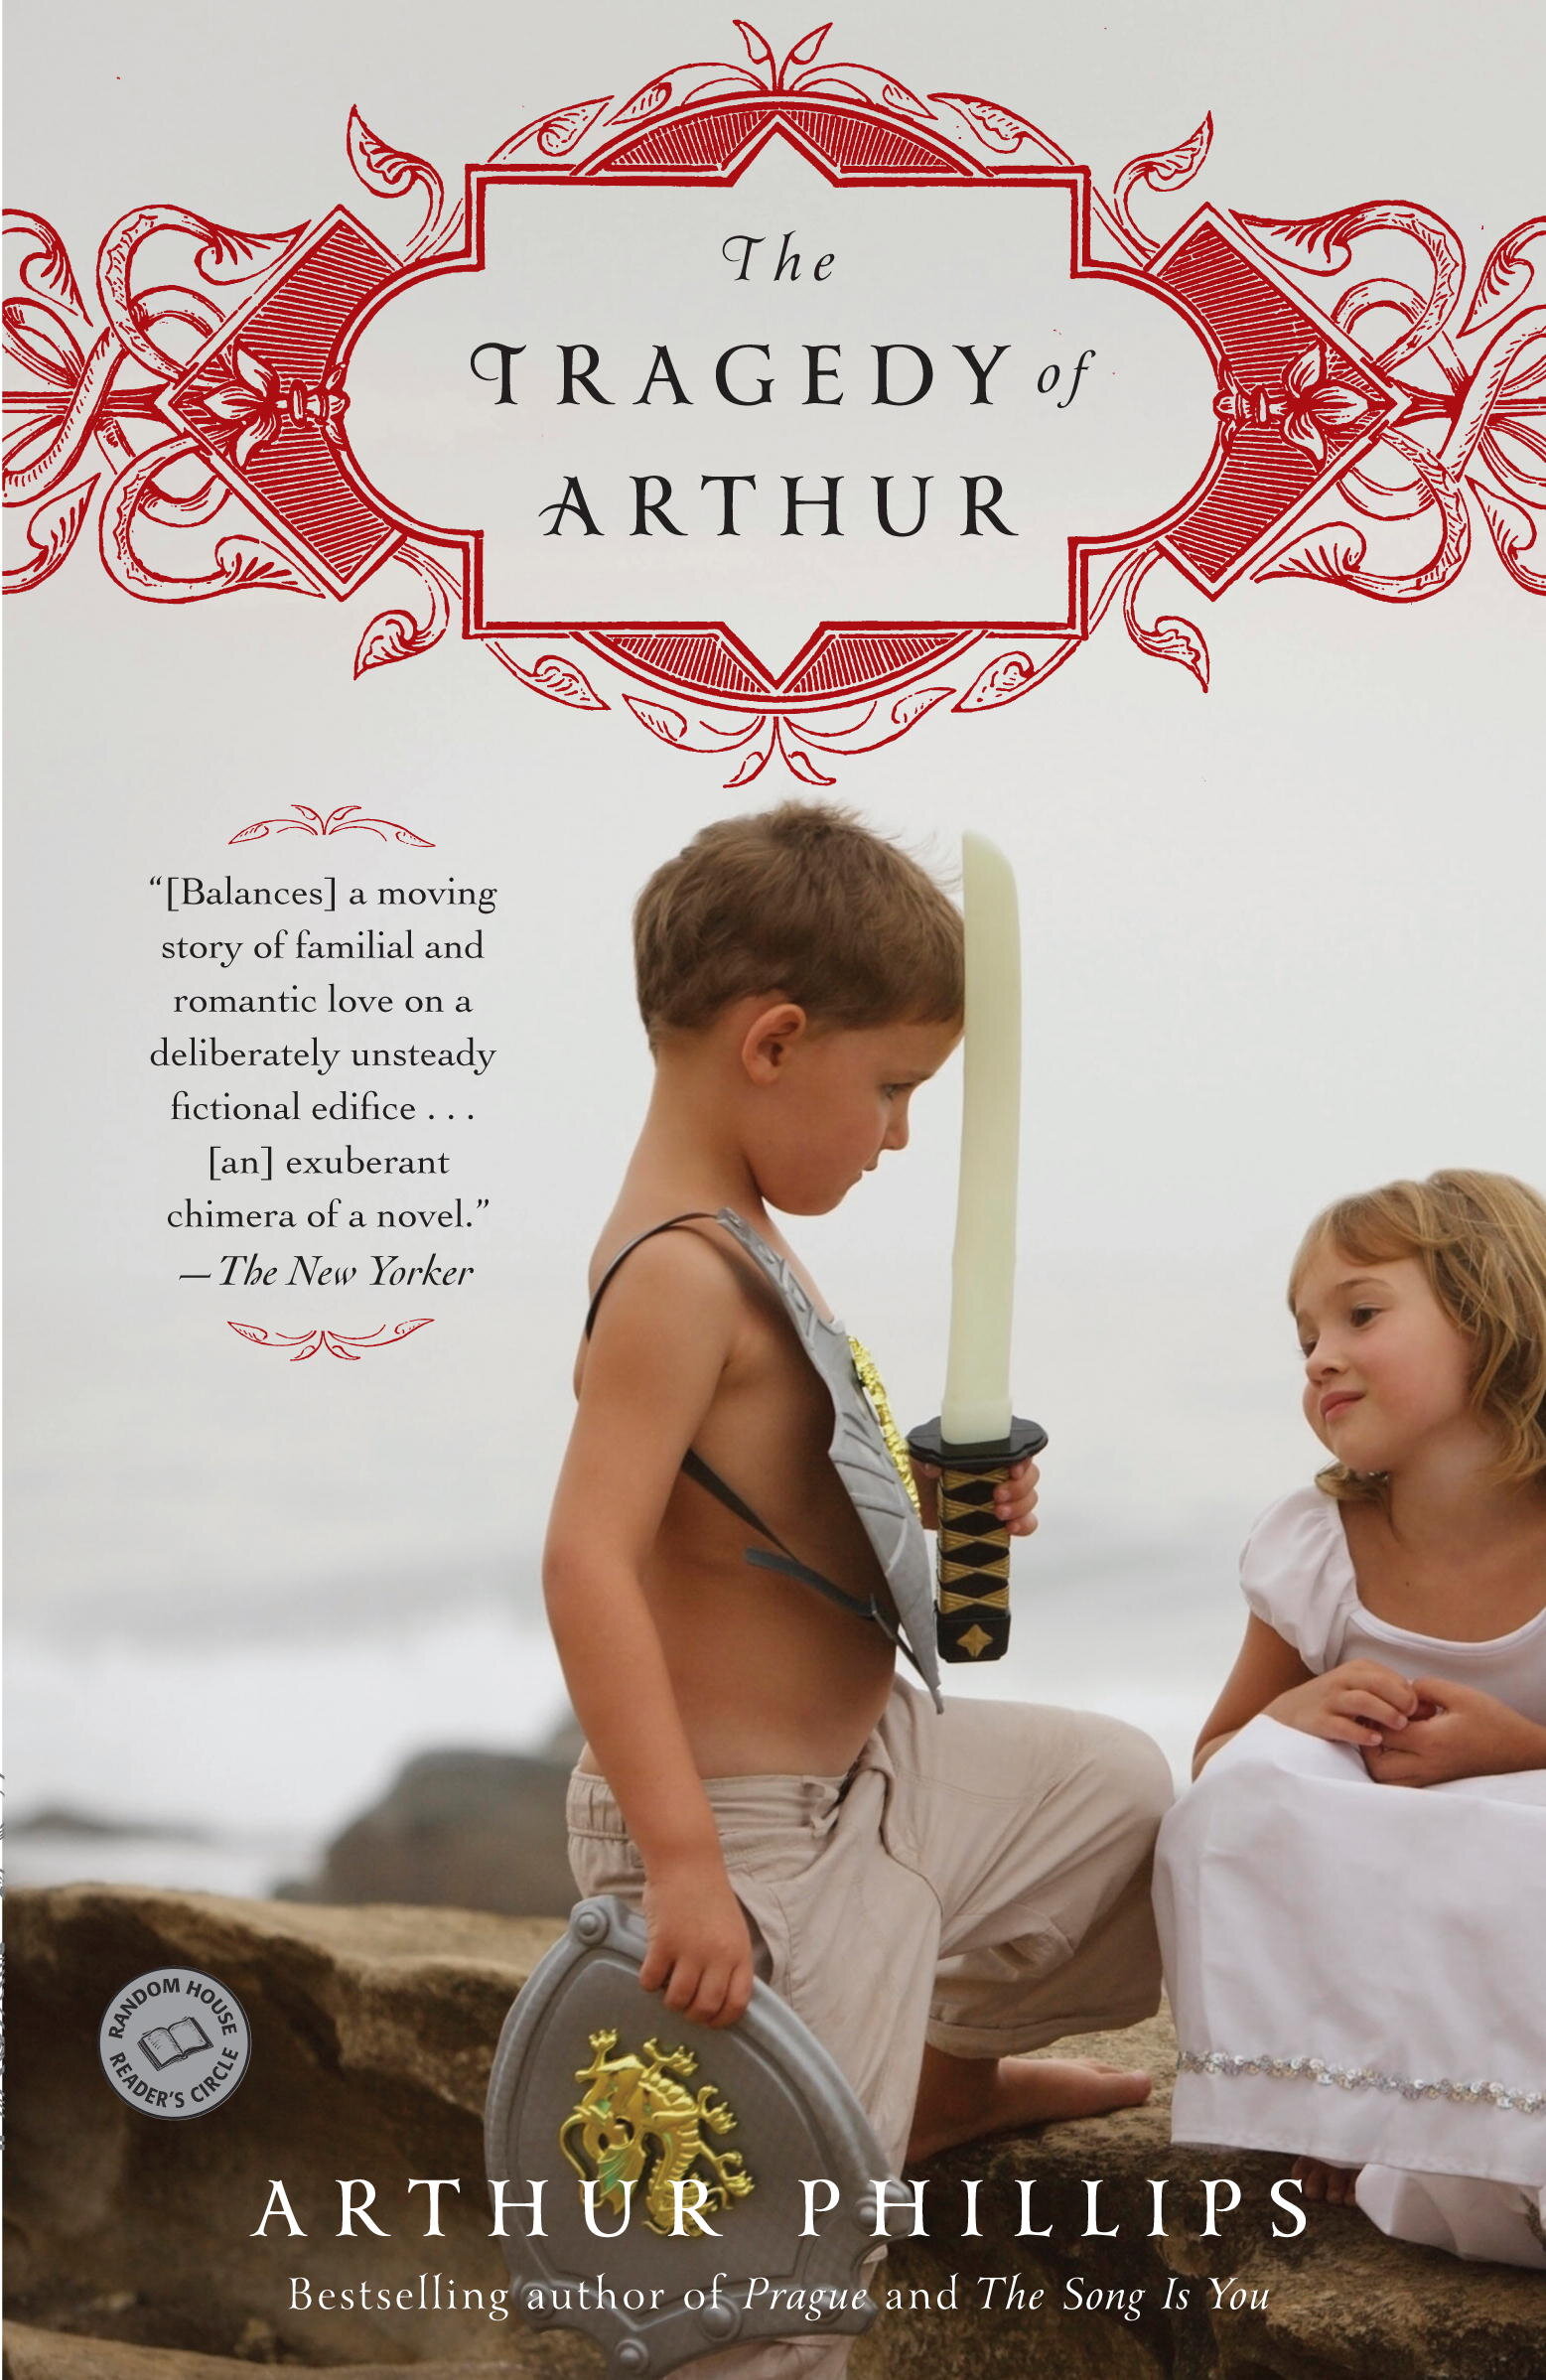 The Tragedy of Arthur, King of Britain by Arthur Phillips